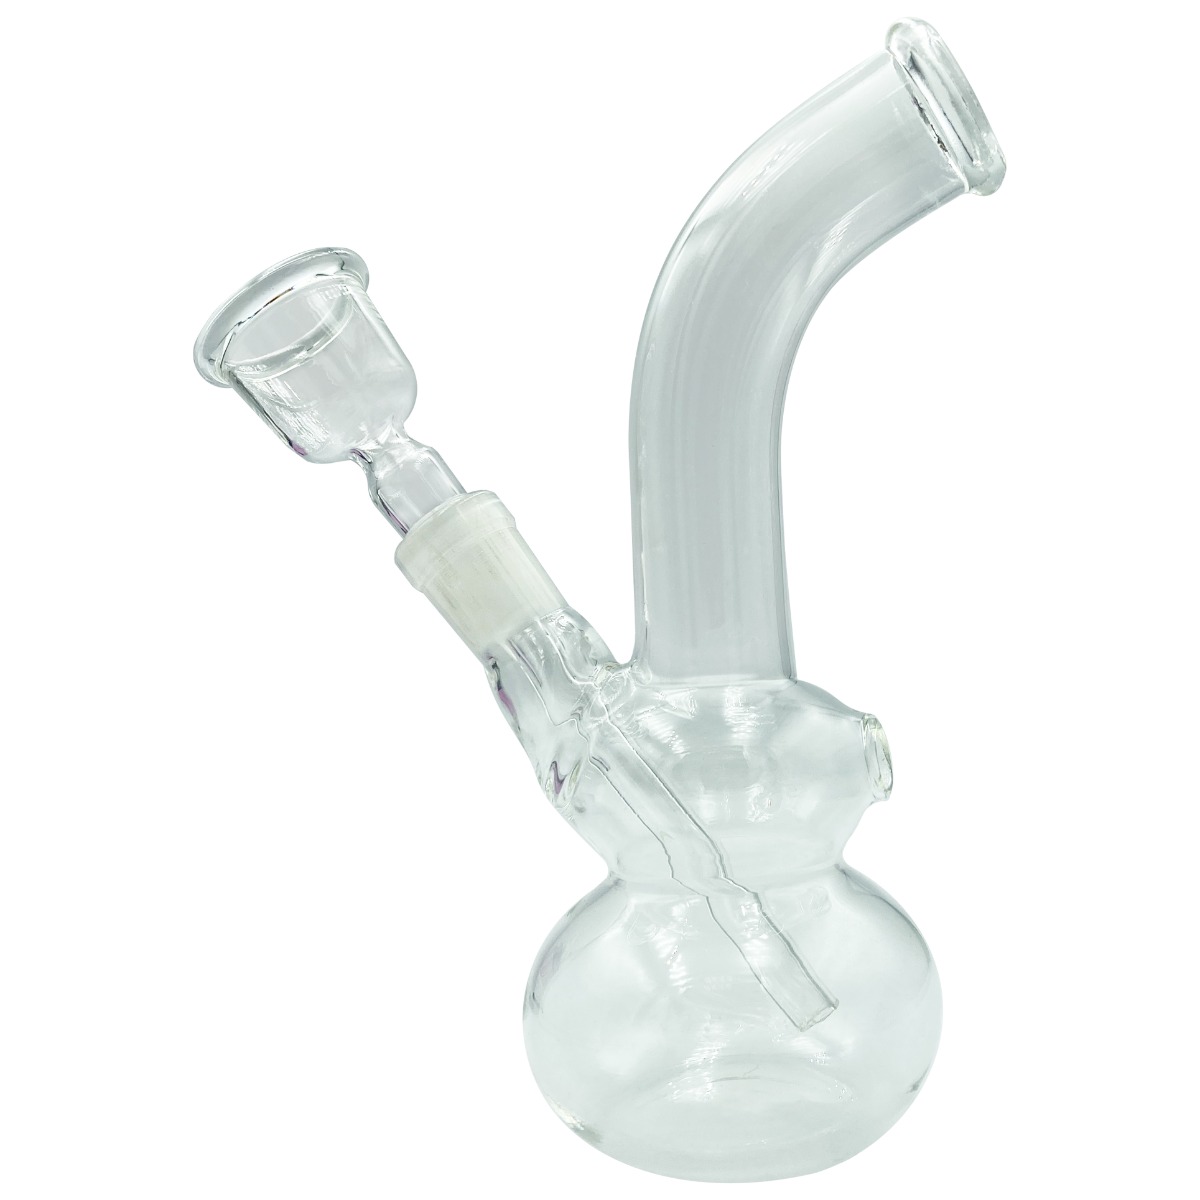 17cm Curved Glass Bong